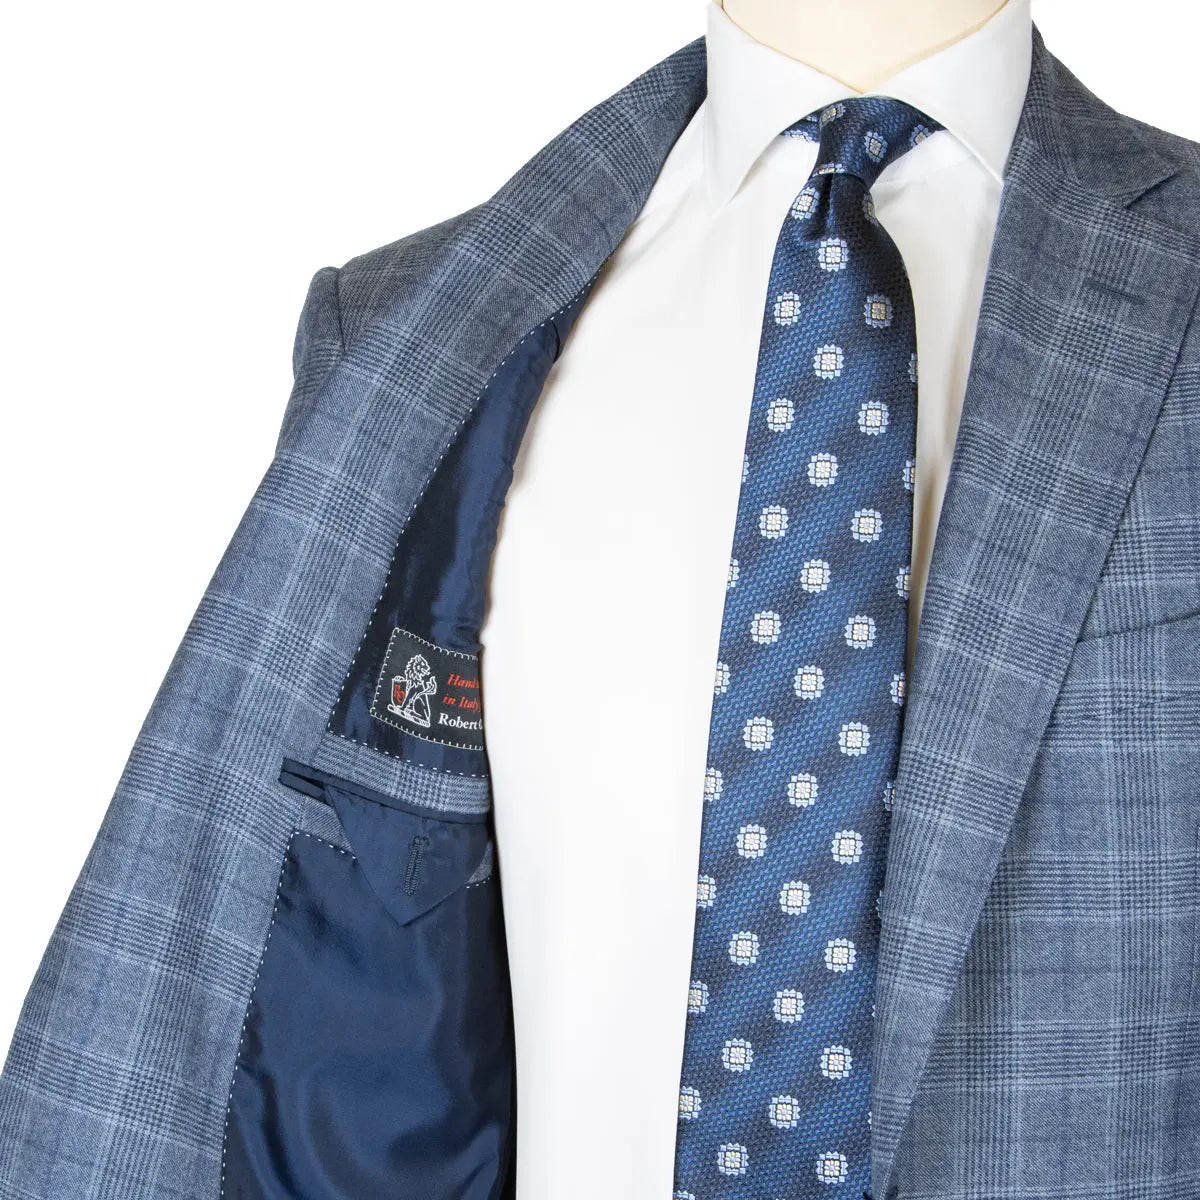 Light Blue Prince of Wales Check Wool Suit  Robert Old   